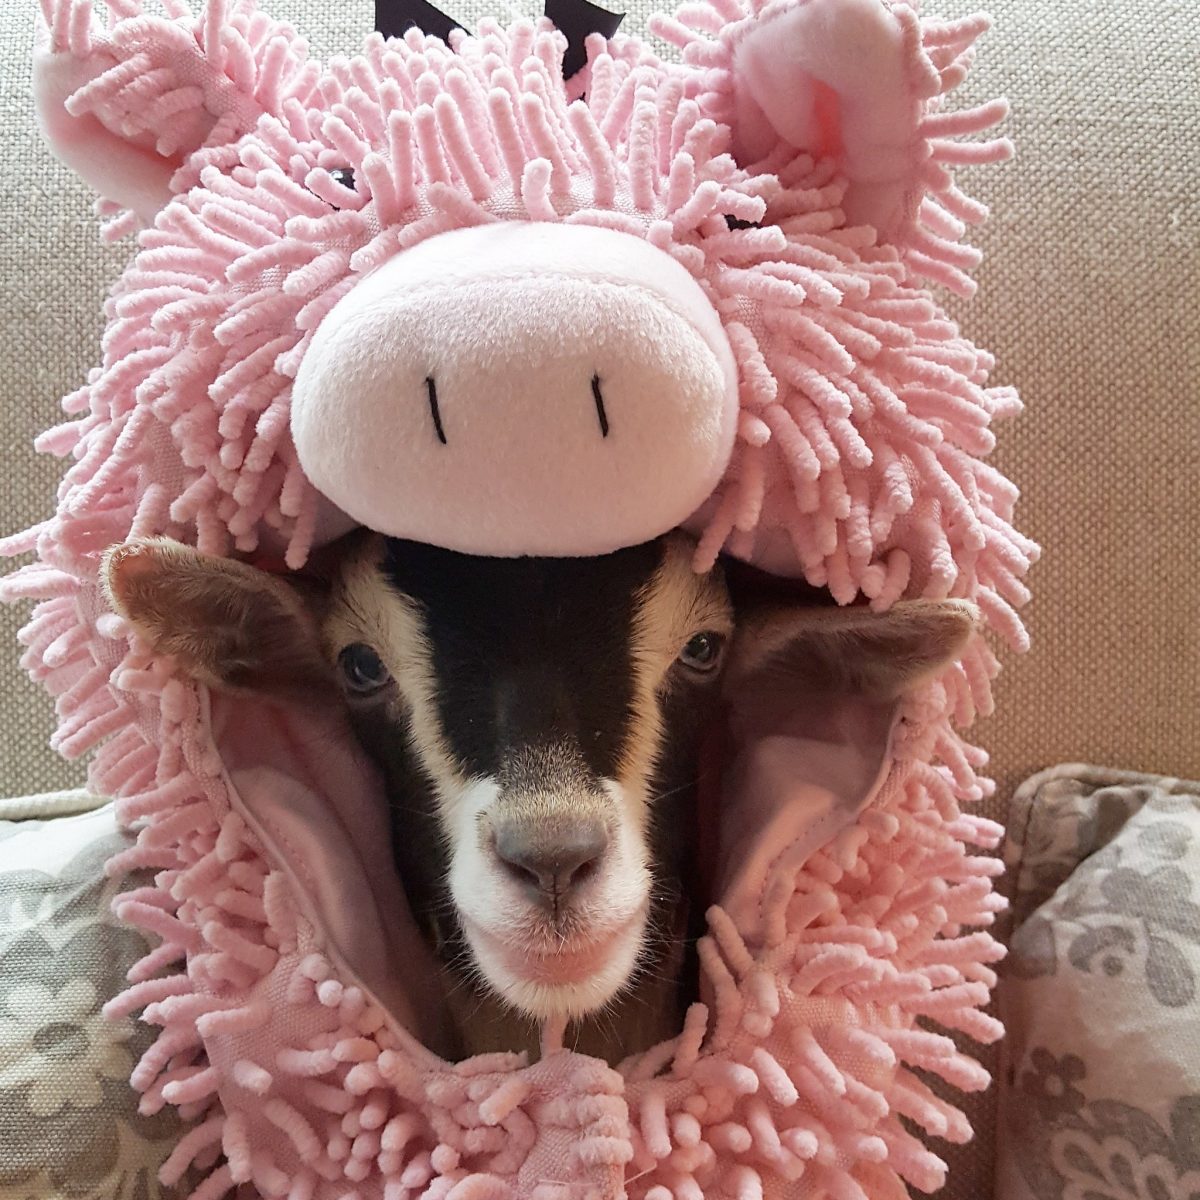 Polly as a Pig - Source: Twitter/Goats of Anarchy